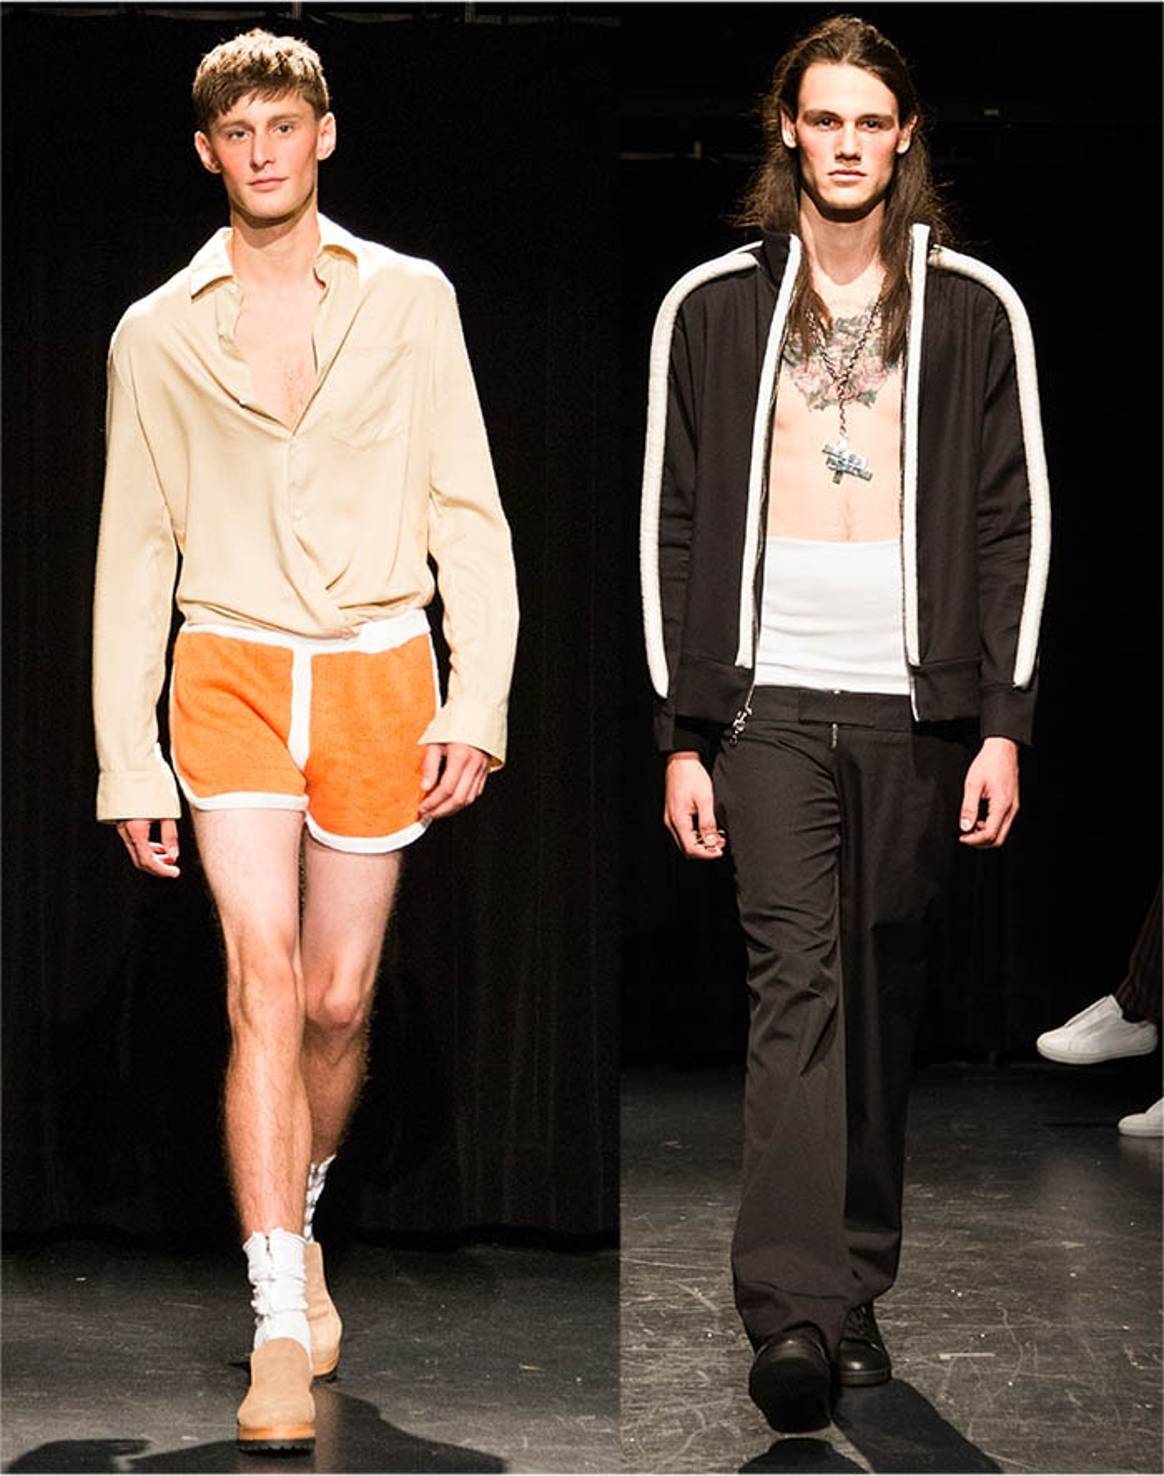 Linder goes against all things traditional about men's wear